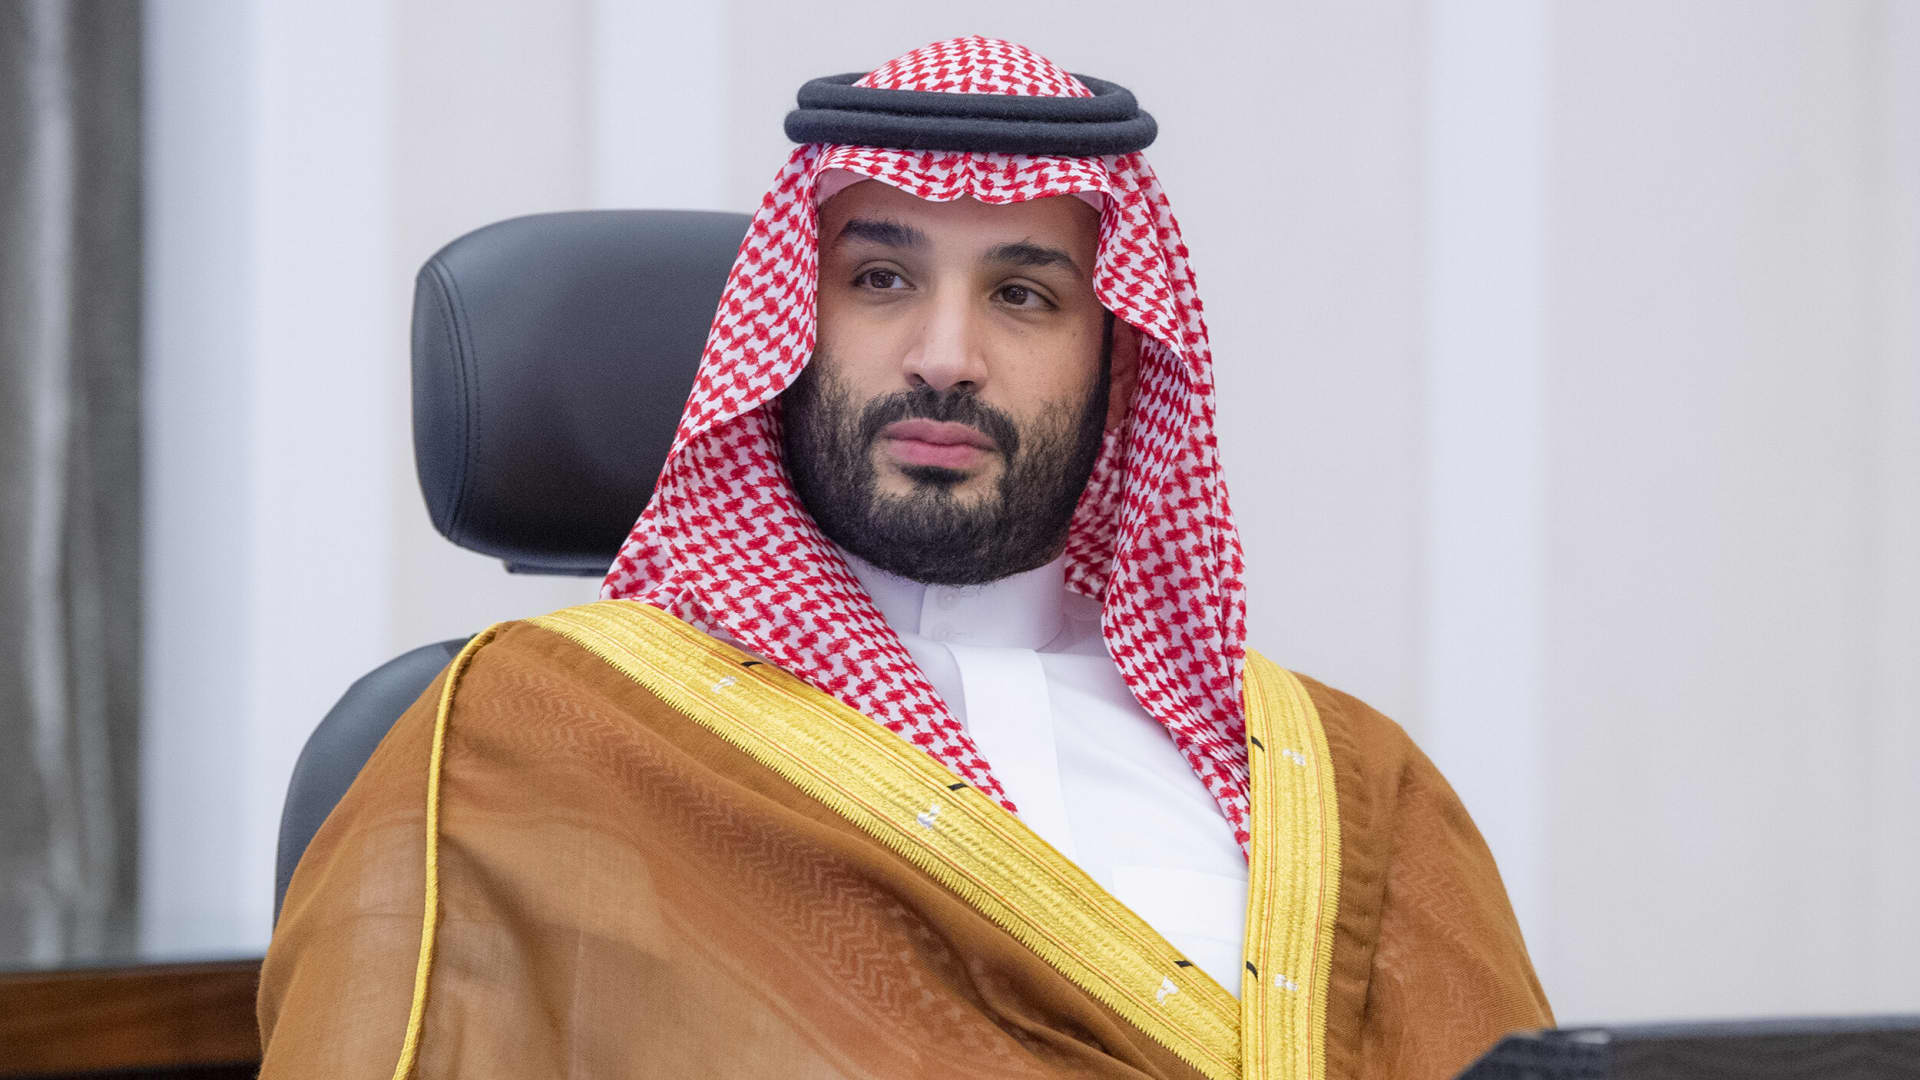 'I don’t care': 'Sportswashing' comments from Saudi crown prince spark anger from rights groups